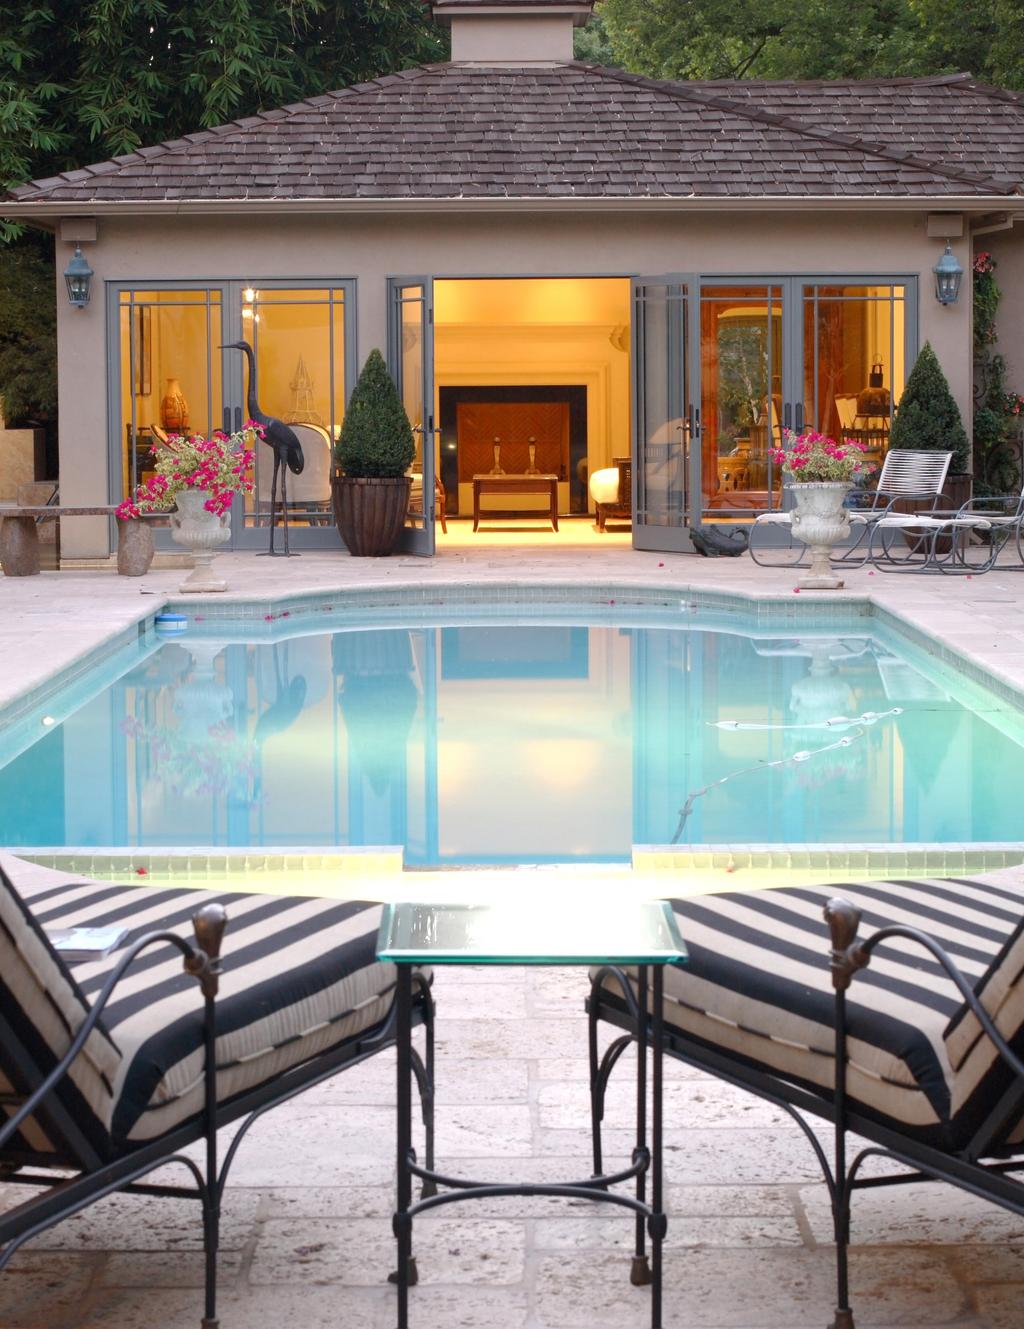 POOL STORAGE IDEAS FROM STORAGE BENCHES TO POOL HOUSES